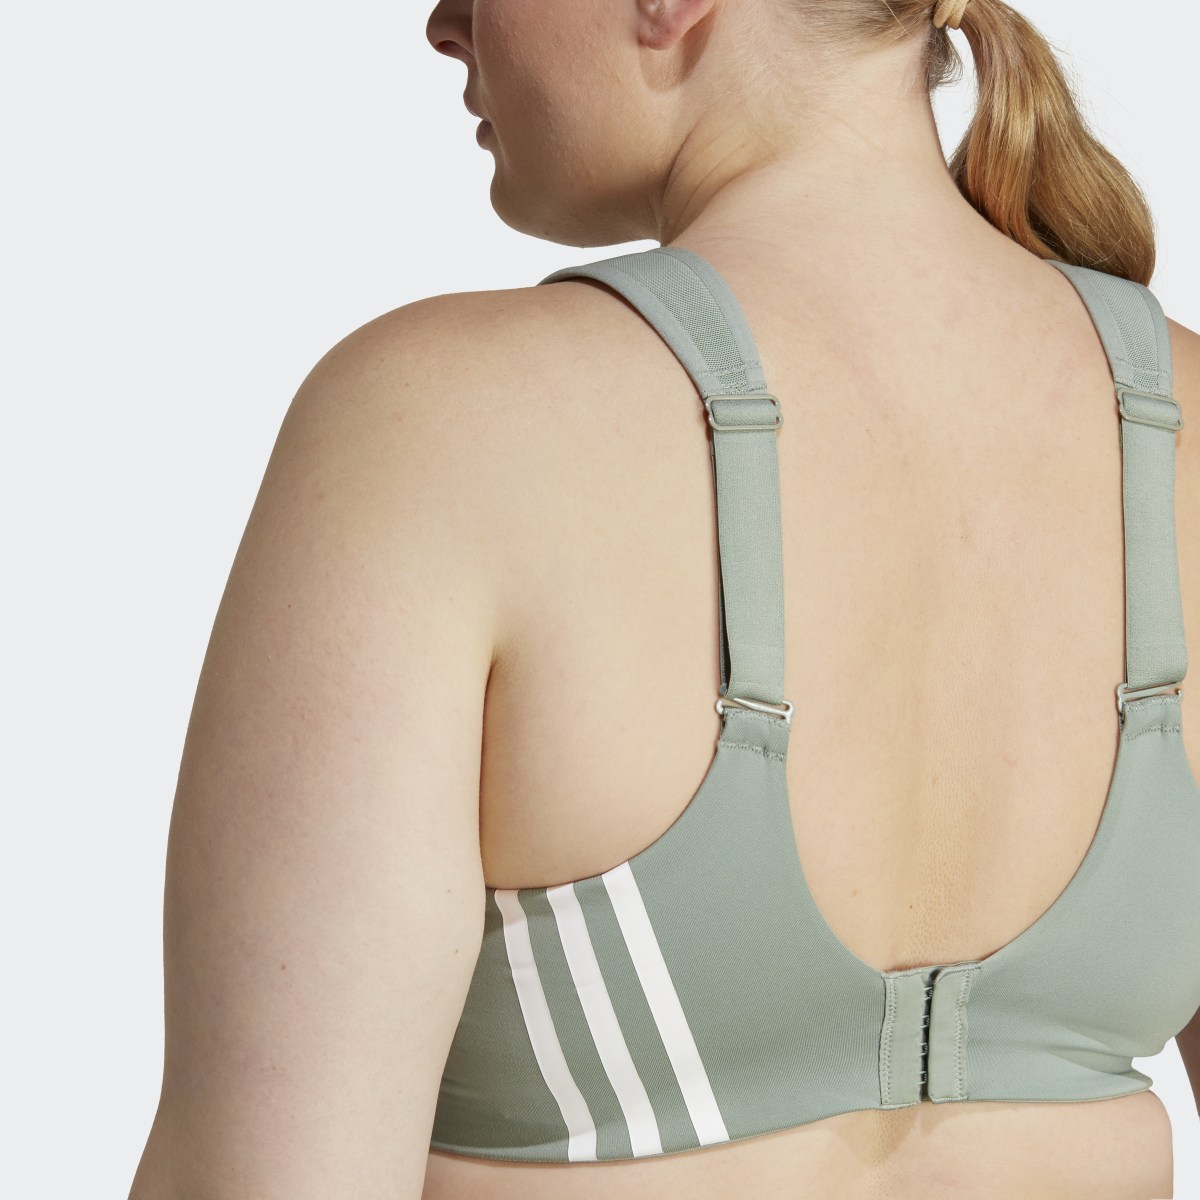 Adidas Brassière adidas TLRD Impact Training Maintien fort (Grandes tailles). 9